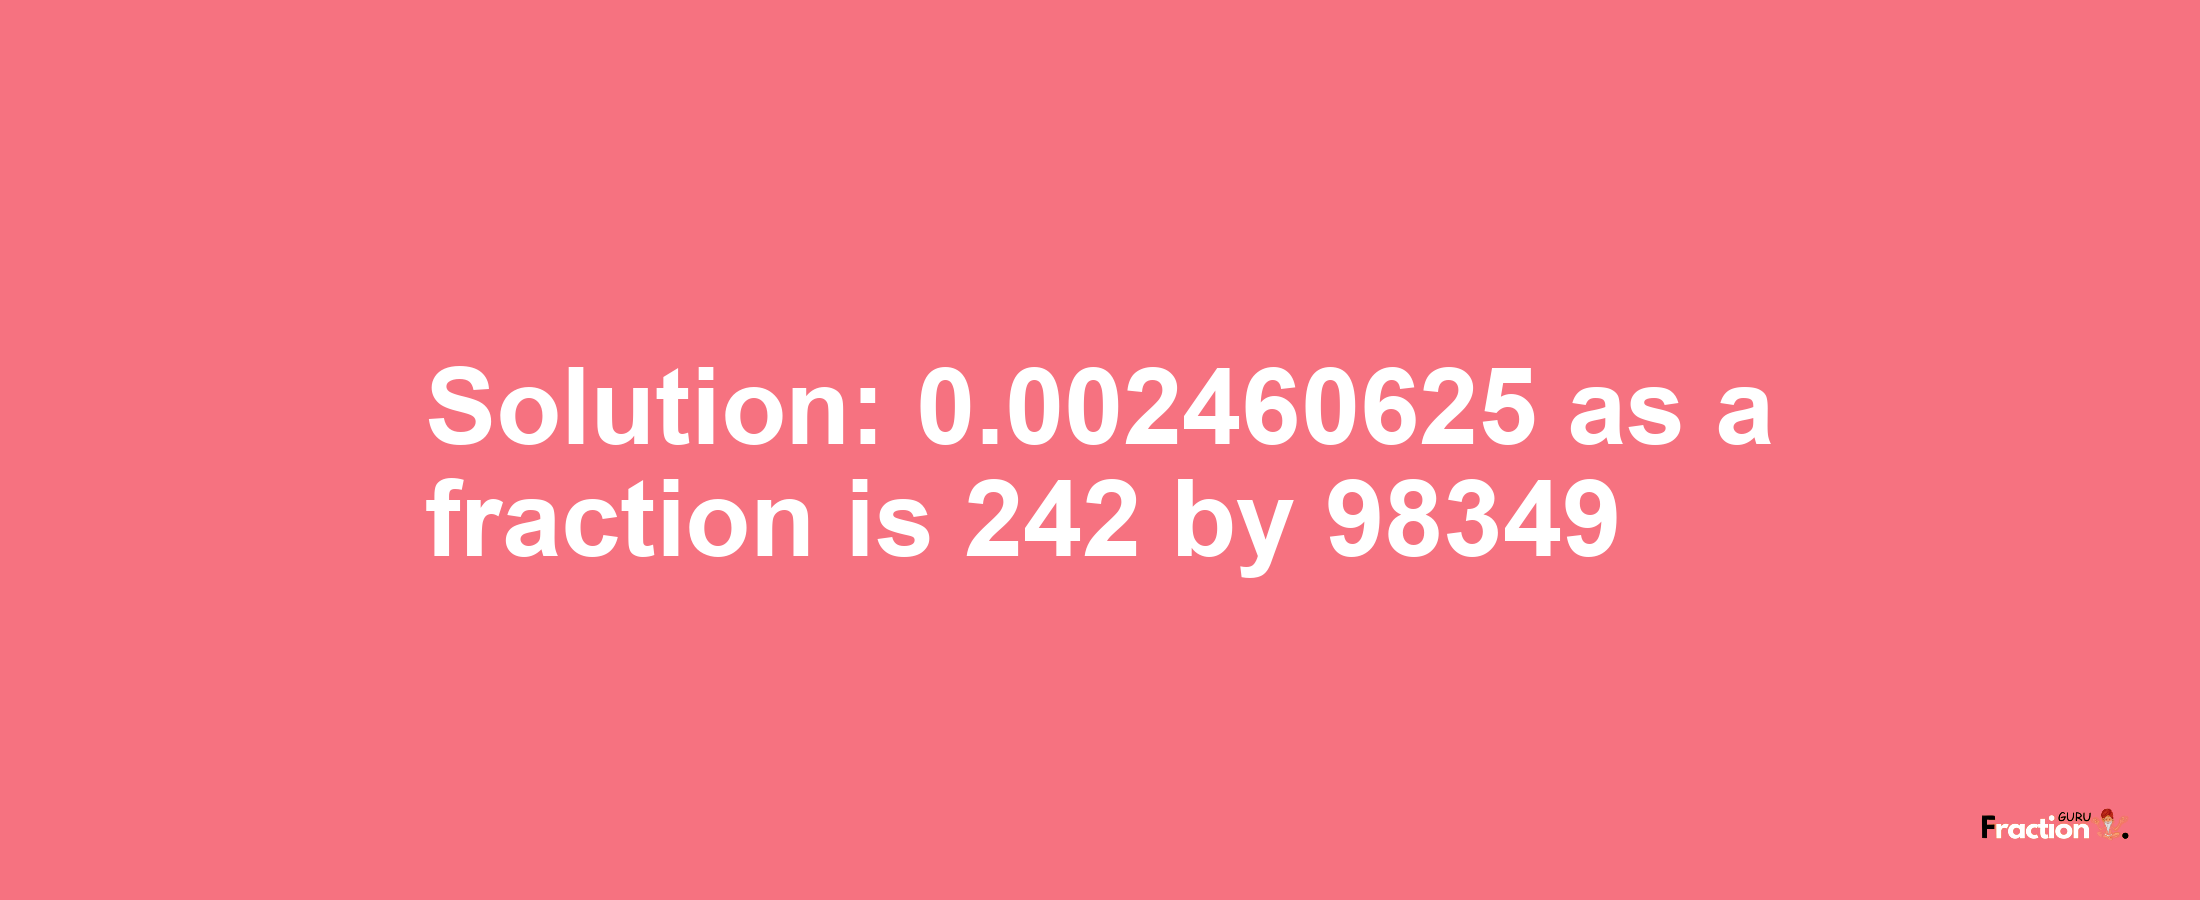 Solution:0.002460625 as a fraction is 242/98349